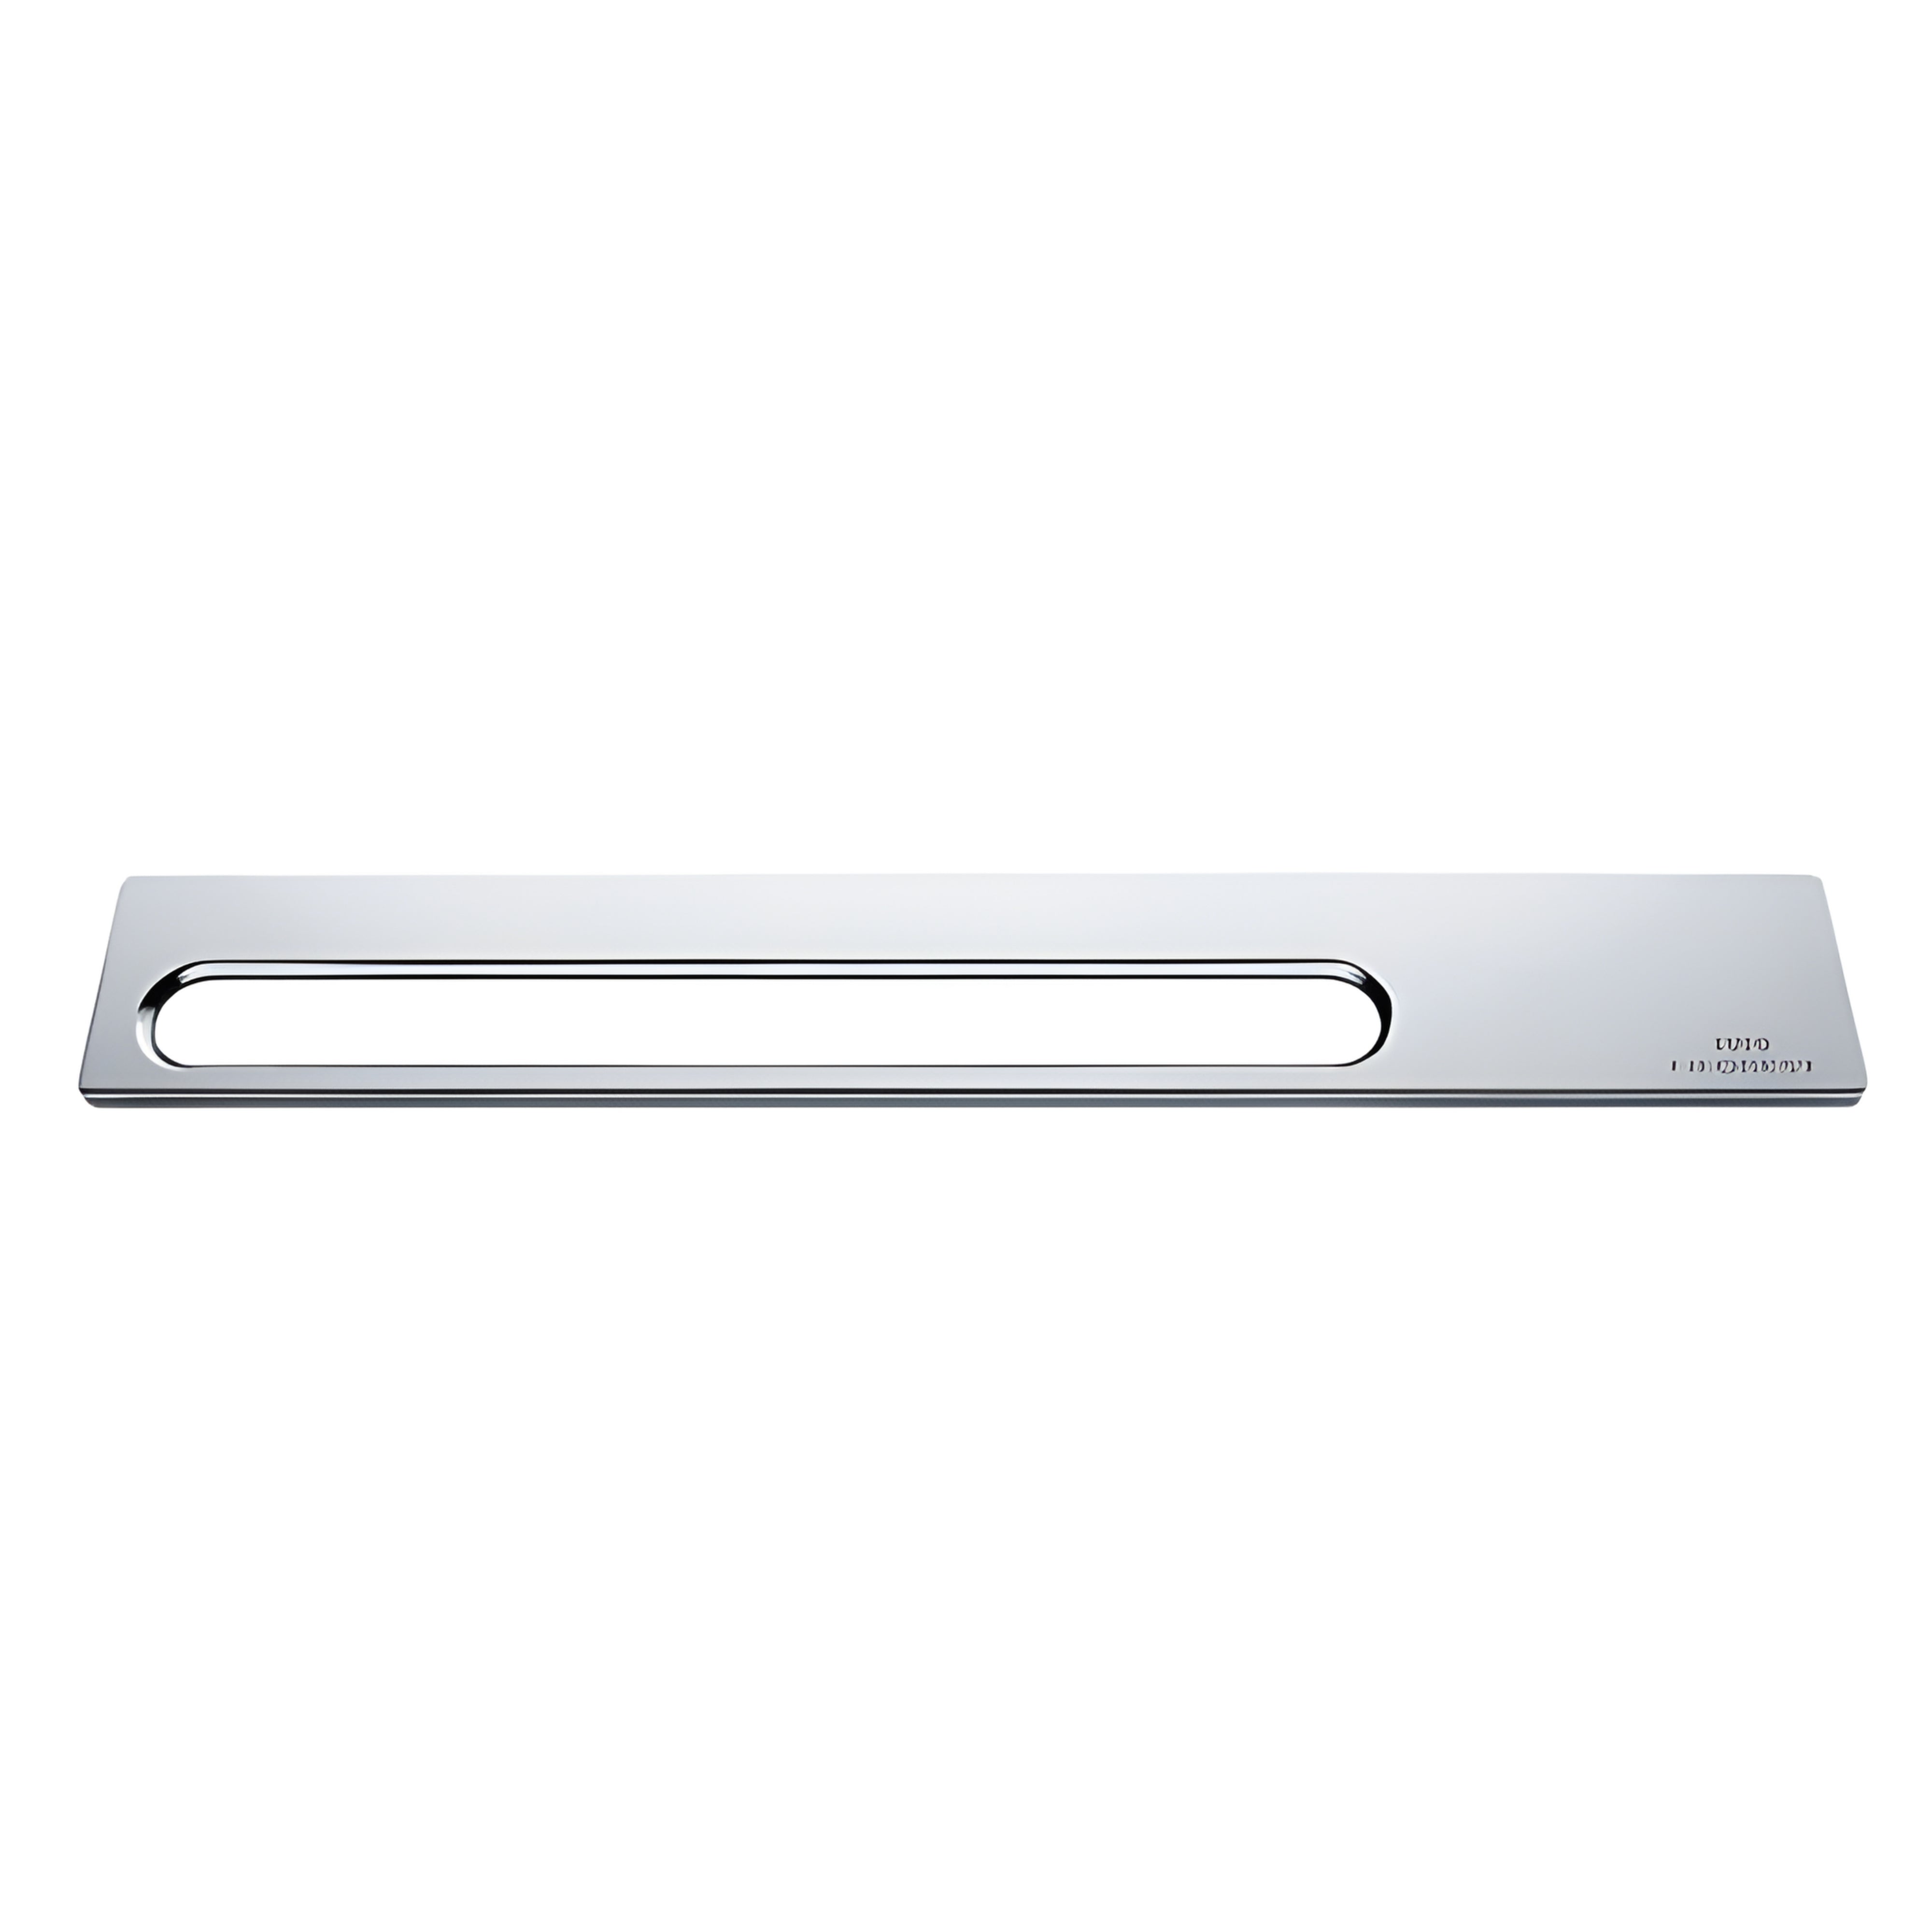 TOTO NEOREST NON-HEATED TOWEL BAR